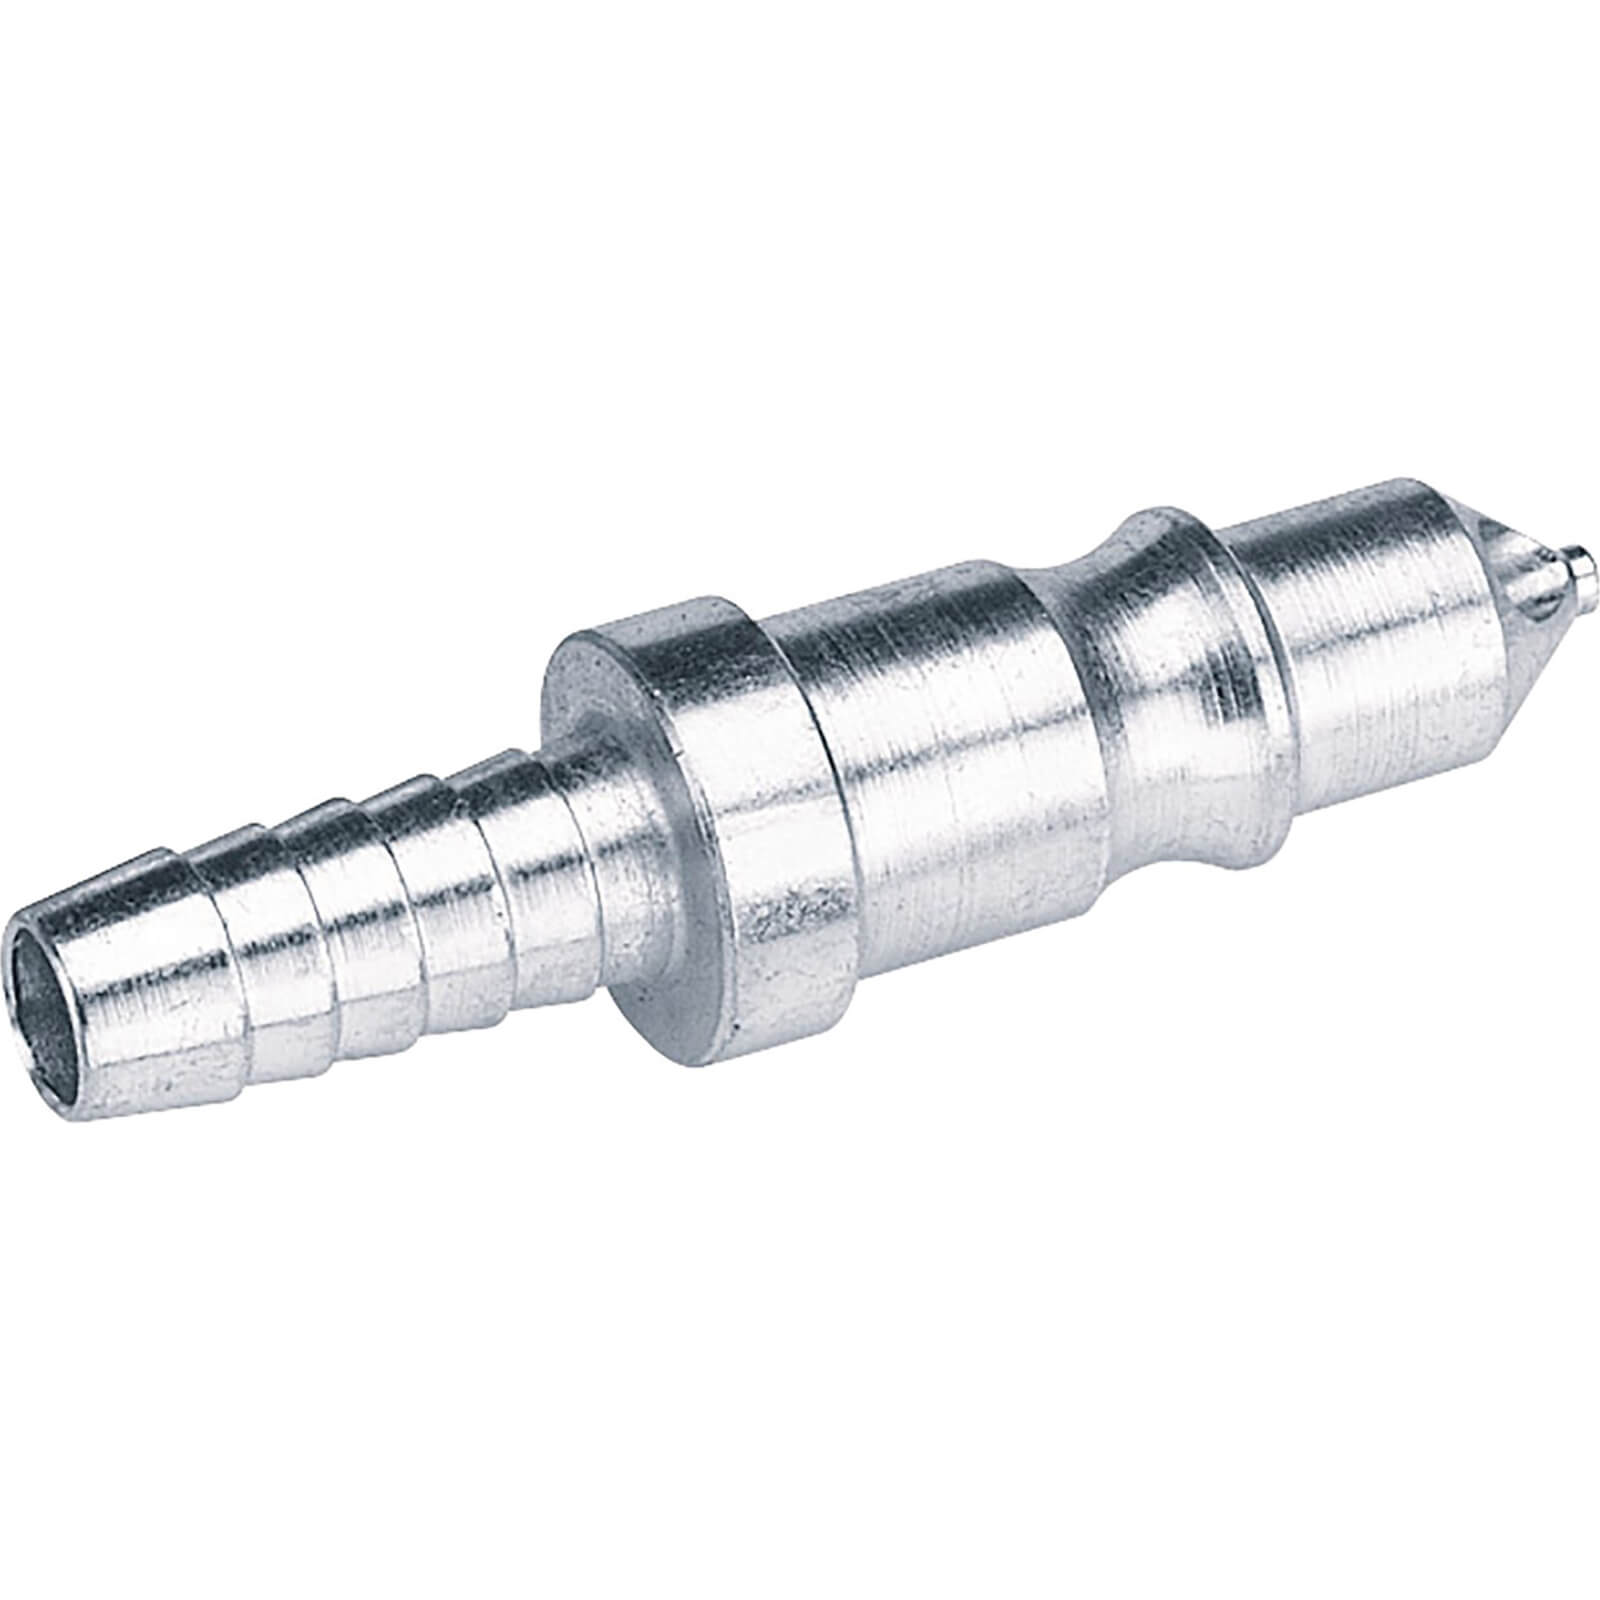 Photos - Equipment Accessory Draper Air Line Coupling Integral Adaptor / Tailpiece 3/8" Pack of 1 